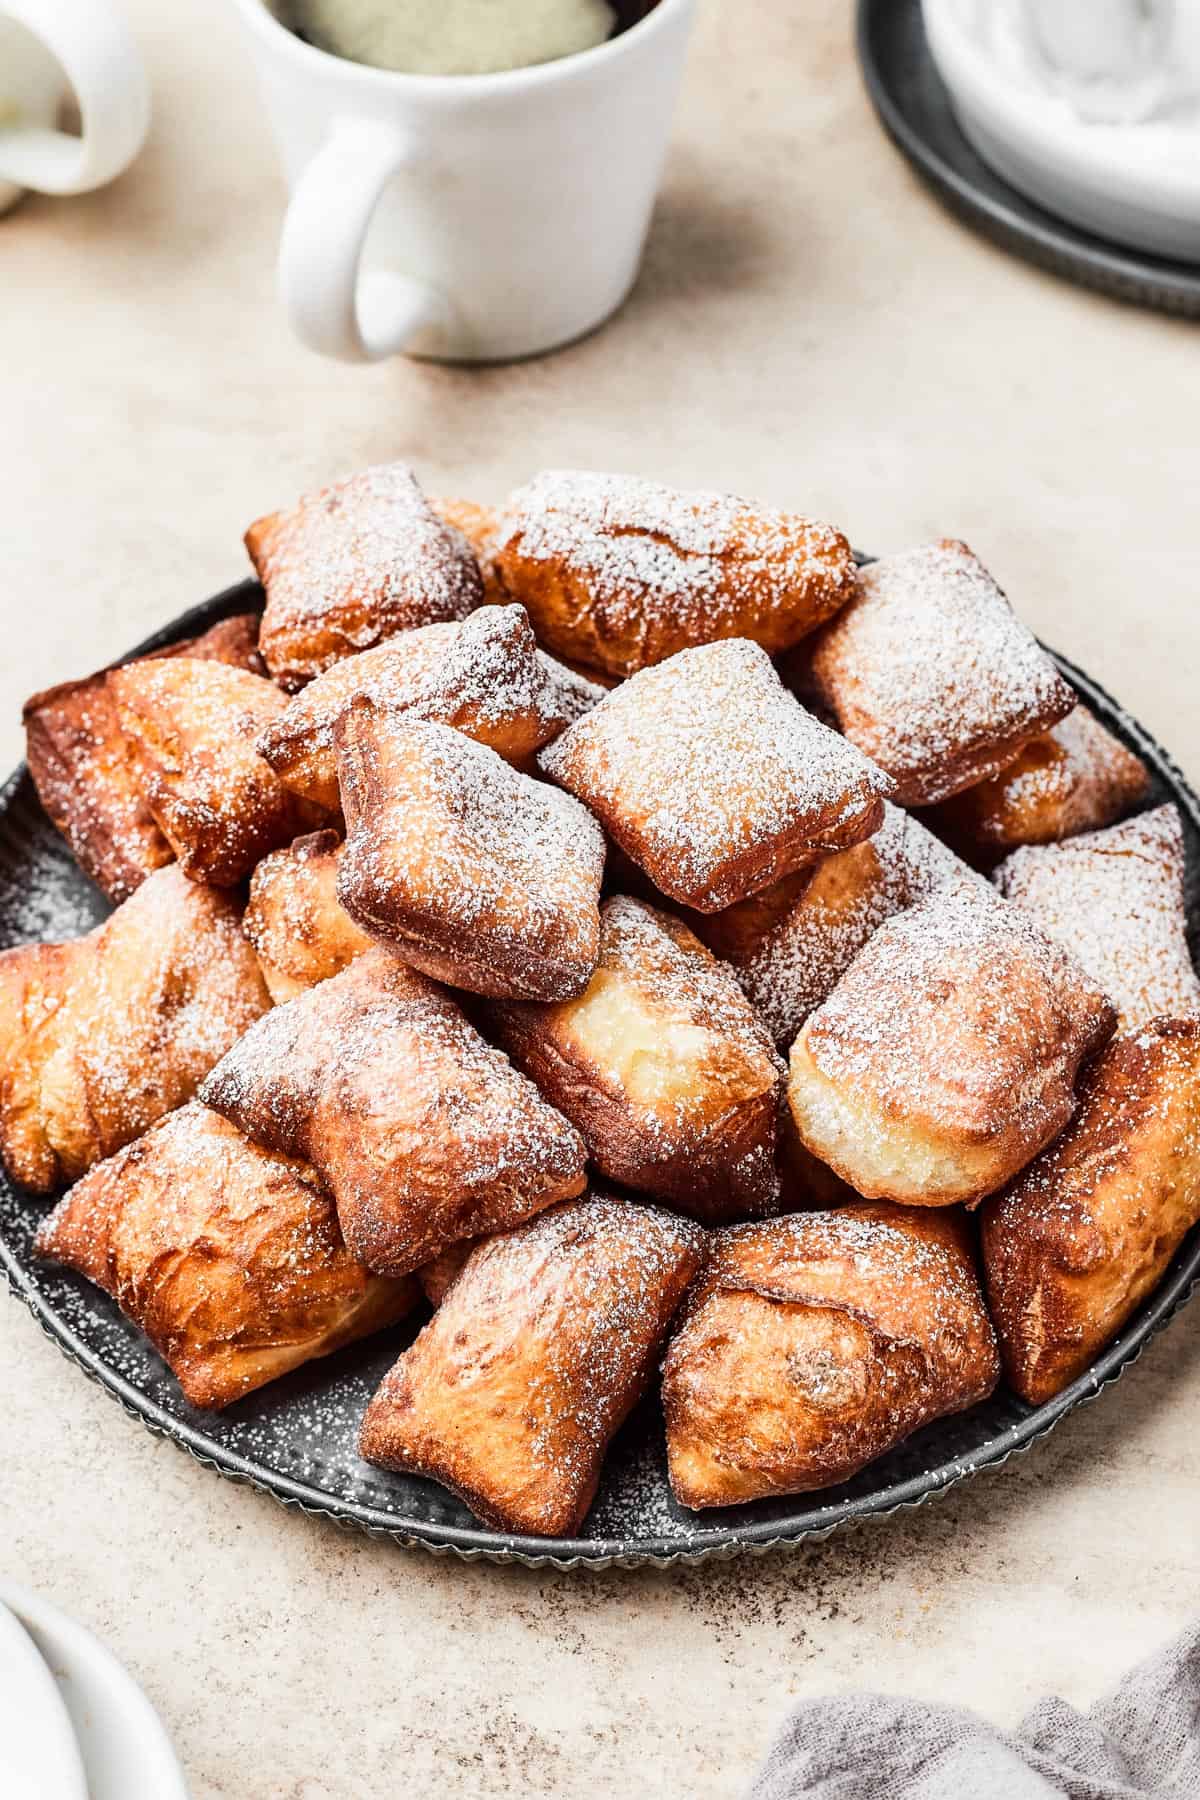 New Orleans-style Beignets stacked and served on a plate.